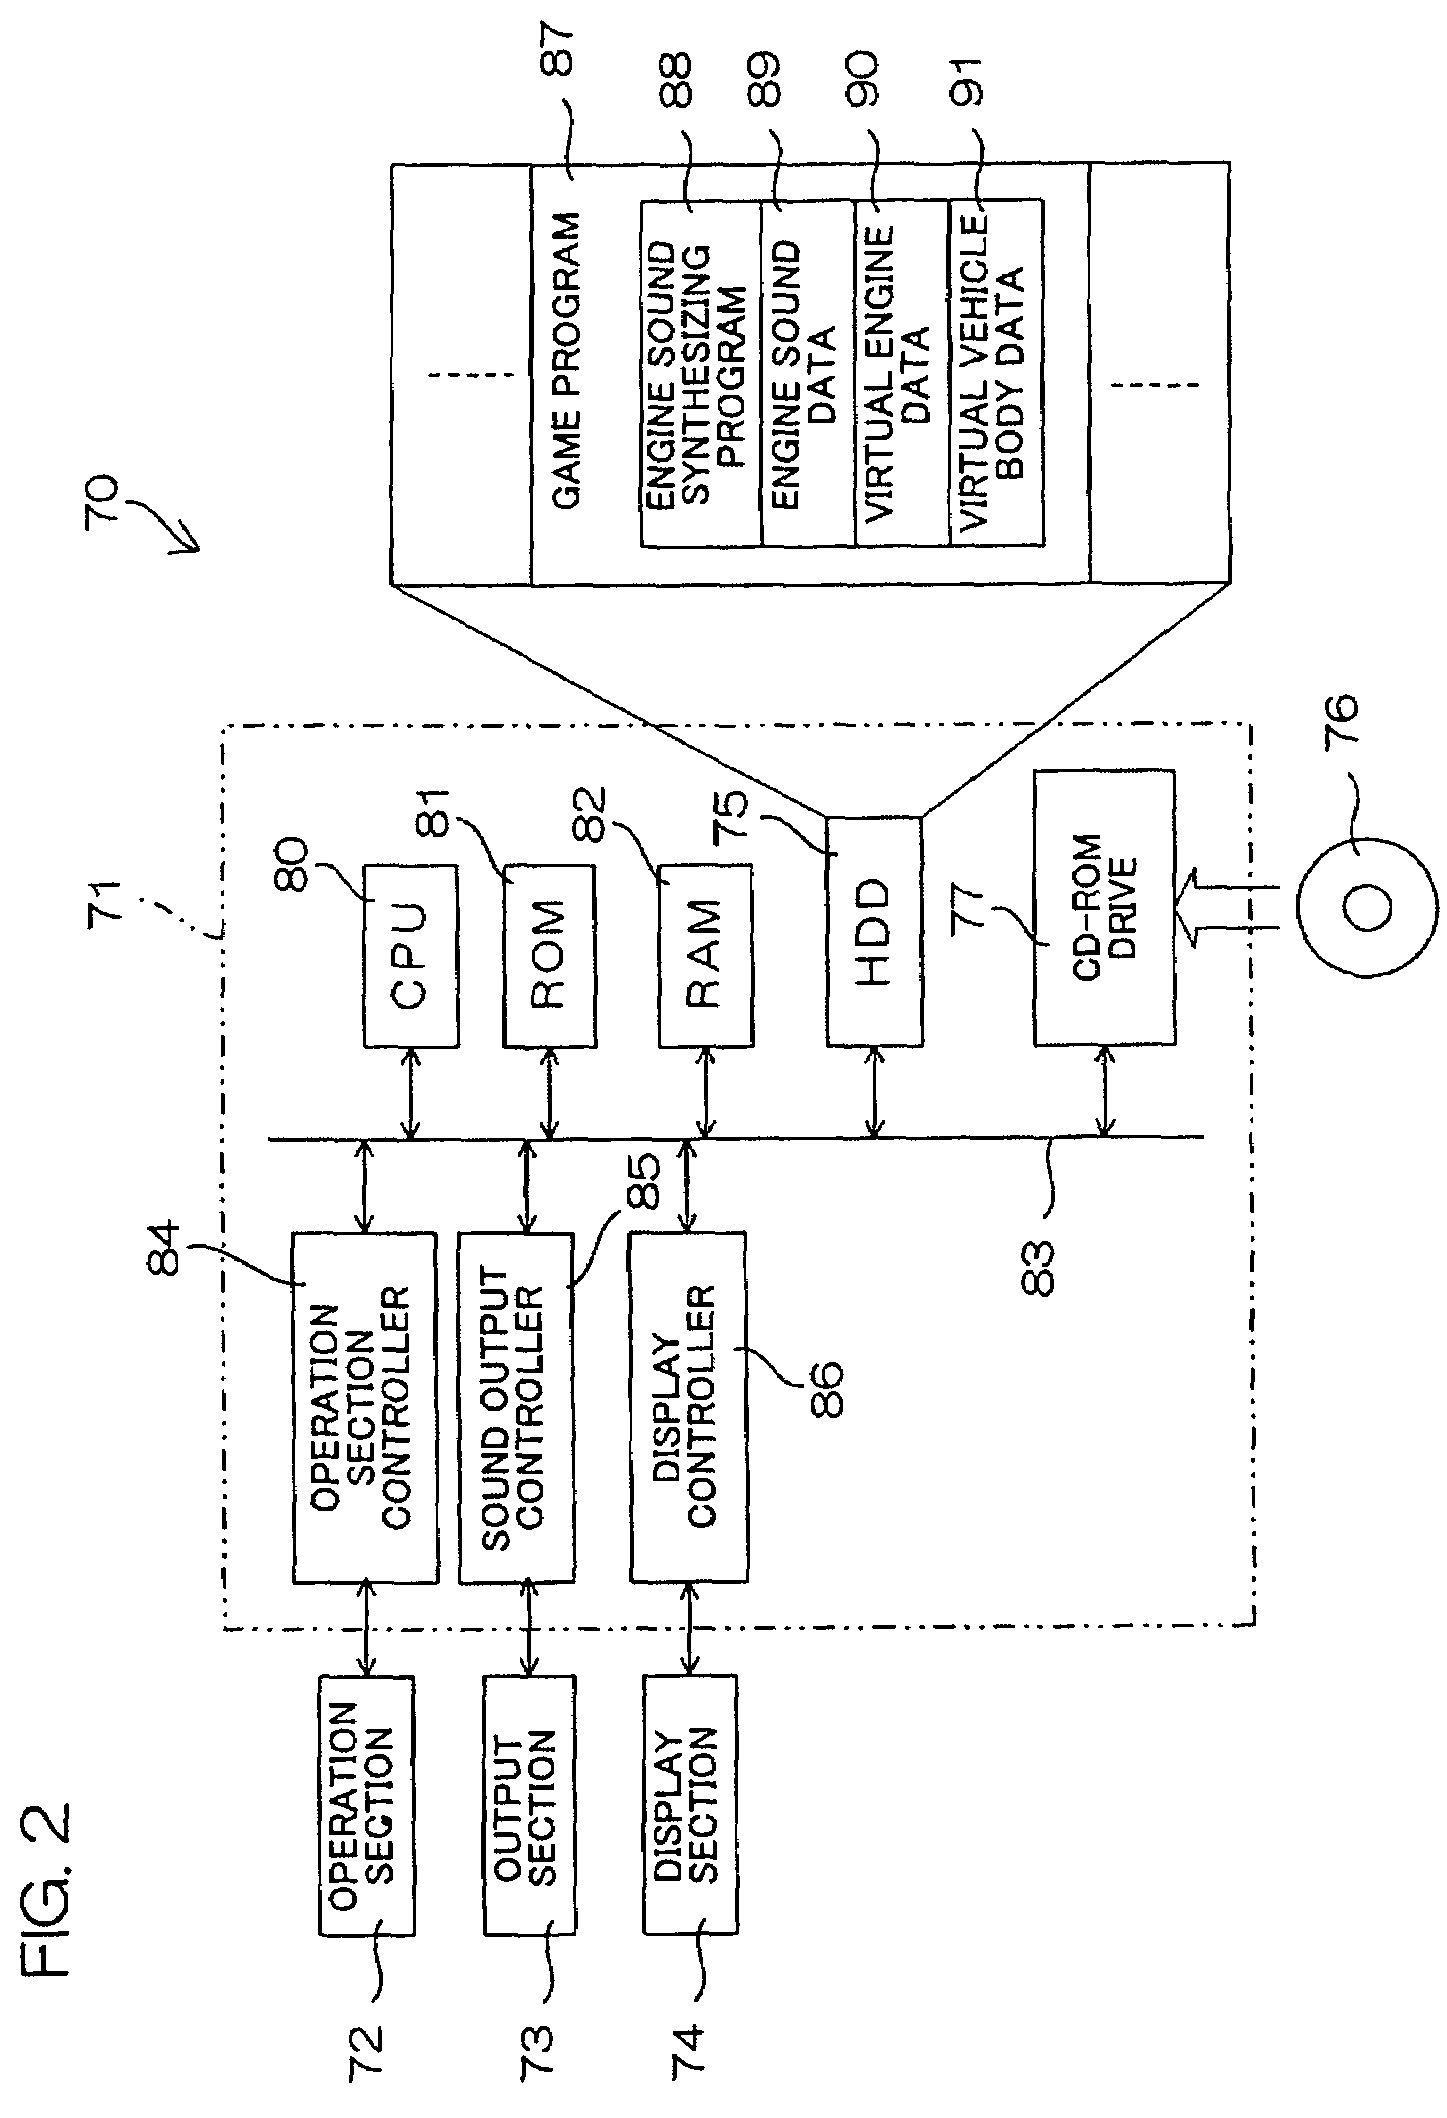 Engine sound synthesizer, motor vehicle and game machine employing the engine sound synthesizer, engine sound synthesizing method, and recording medium containing computer program for engine sound synthesis